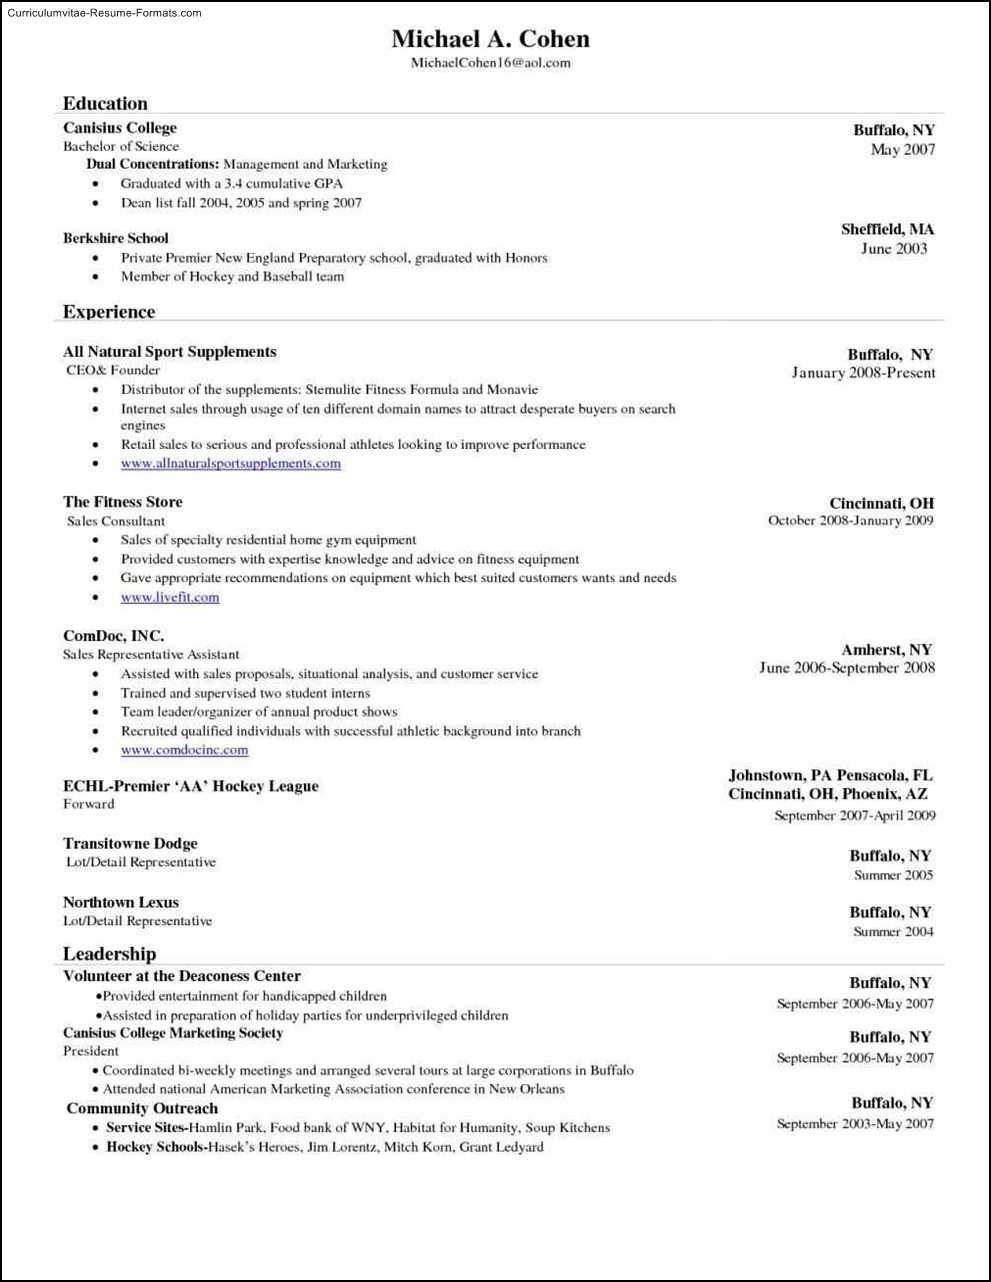 Resume Wizard In Ms Word | Professional Resumes Sample Online With Regard To Resume Templates Microsoft Word 2010